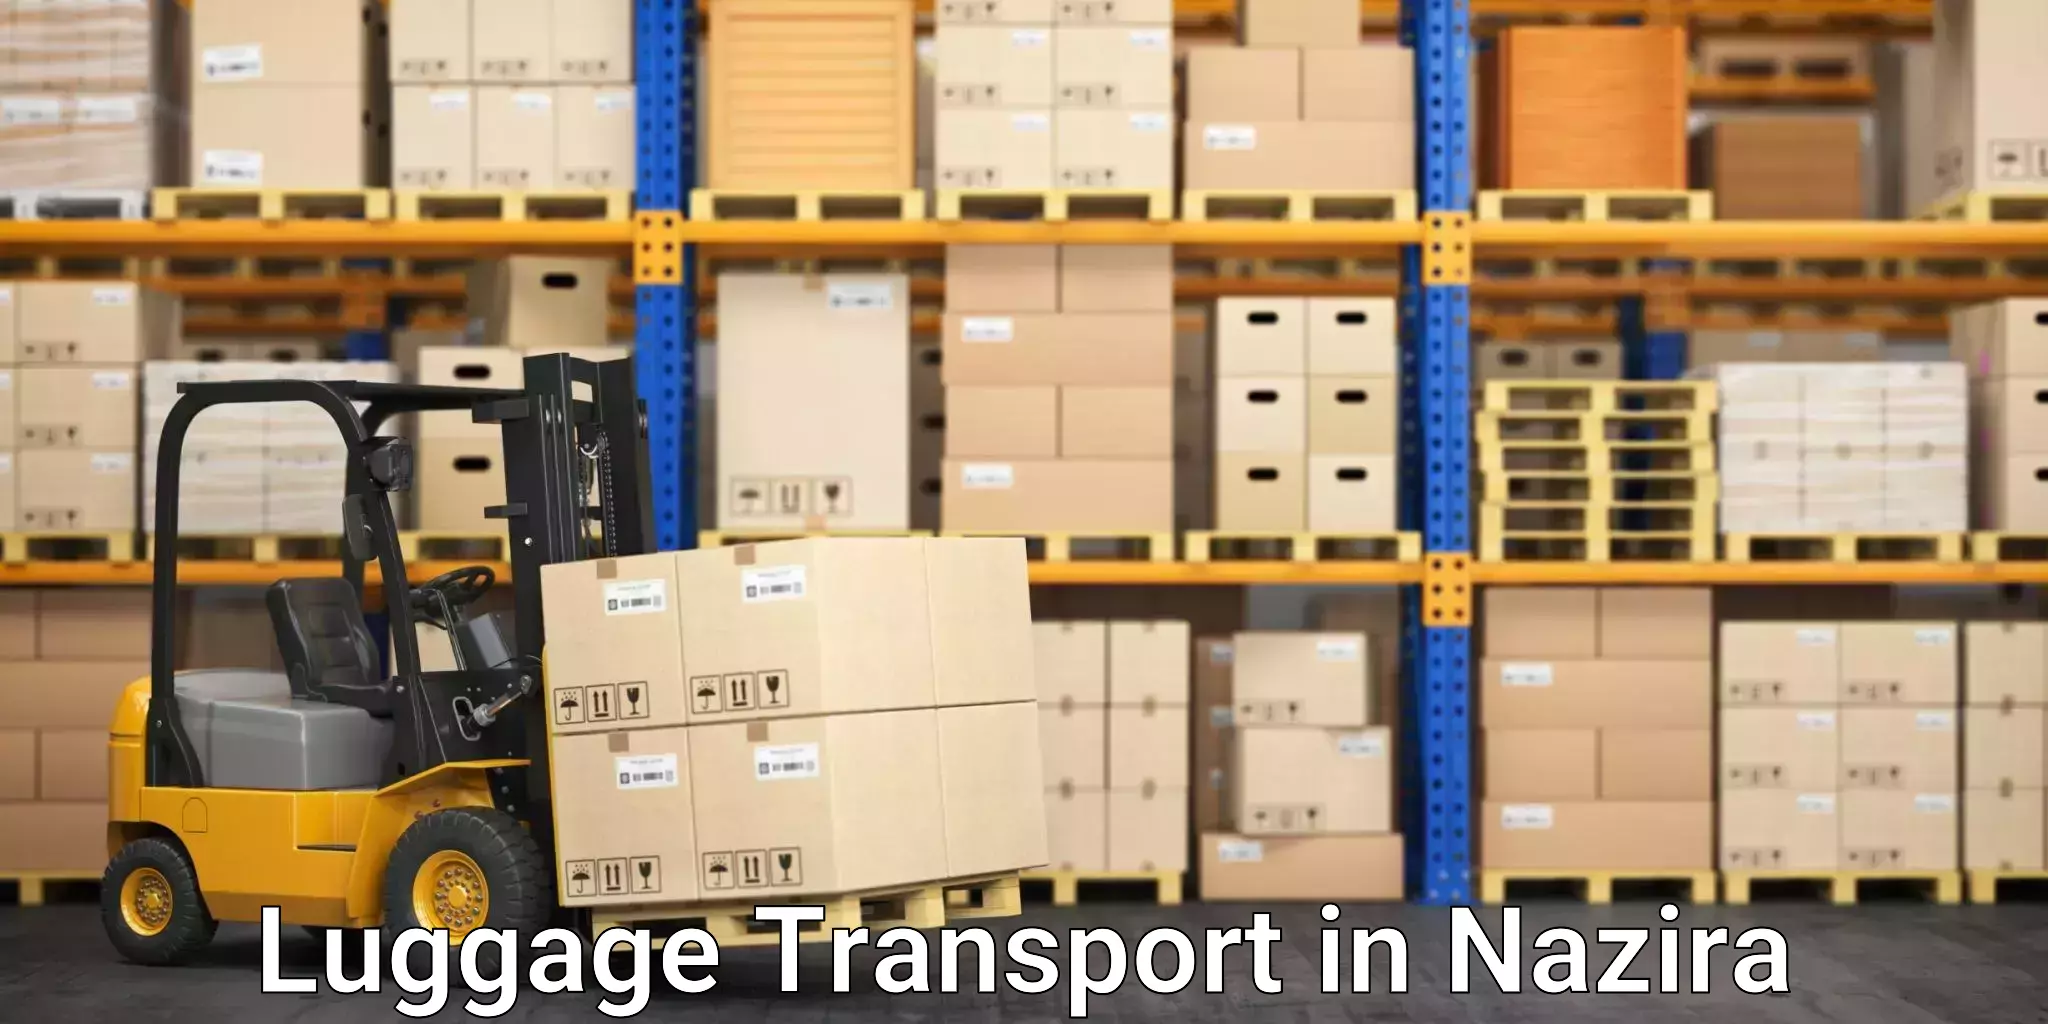 Discounted baggage transport in Nazira